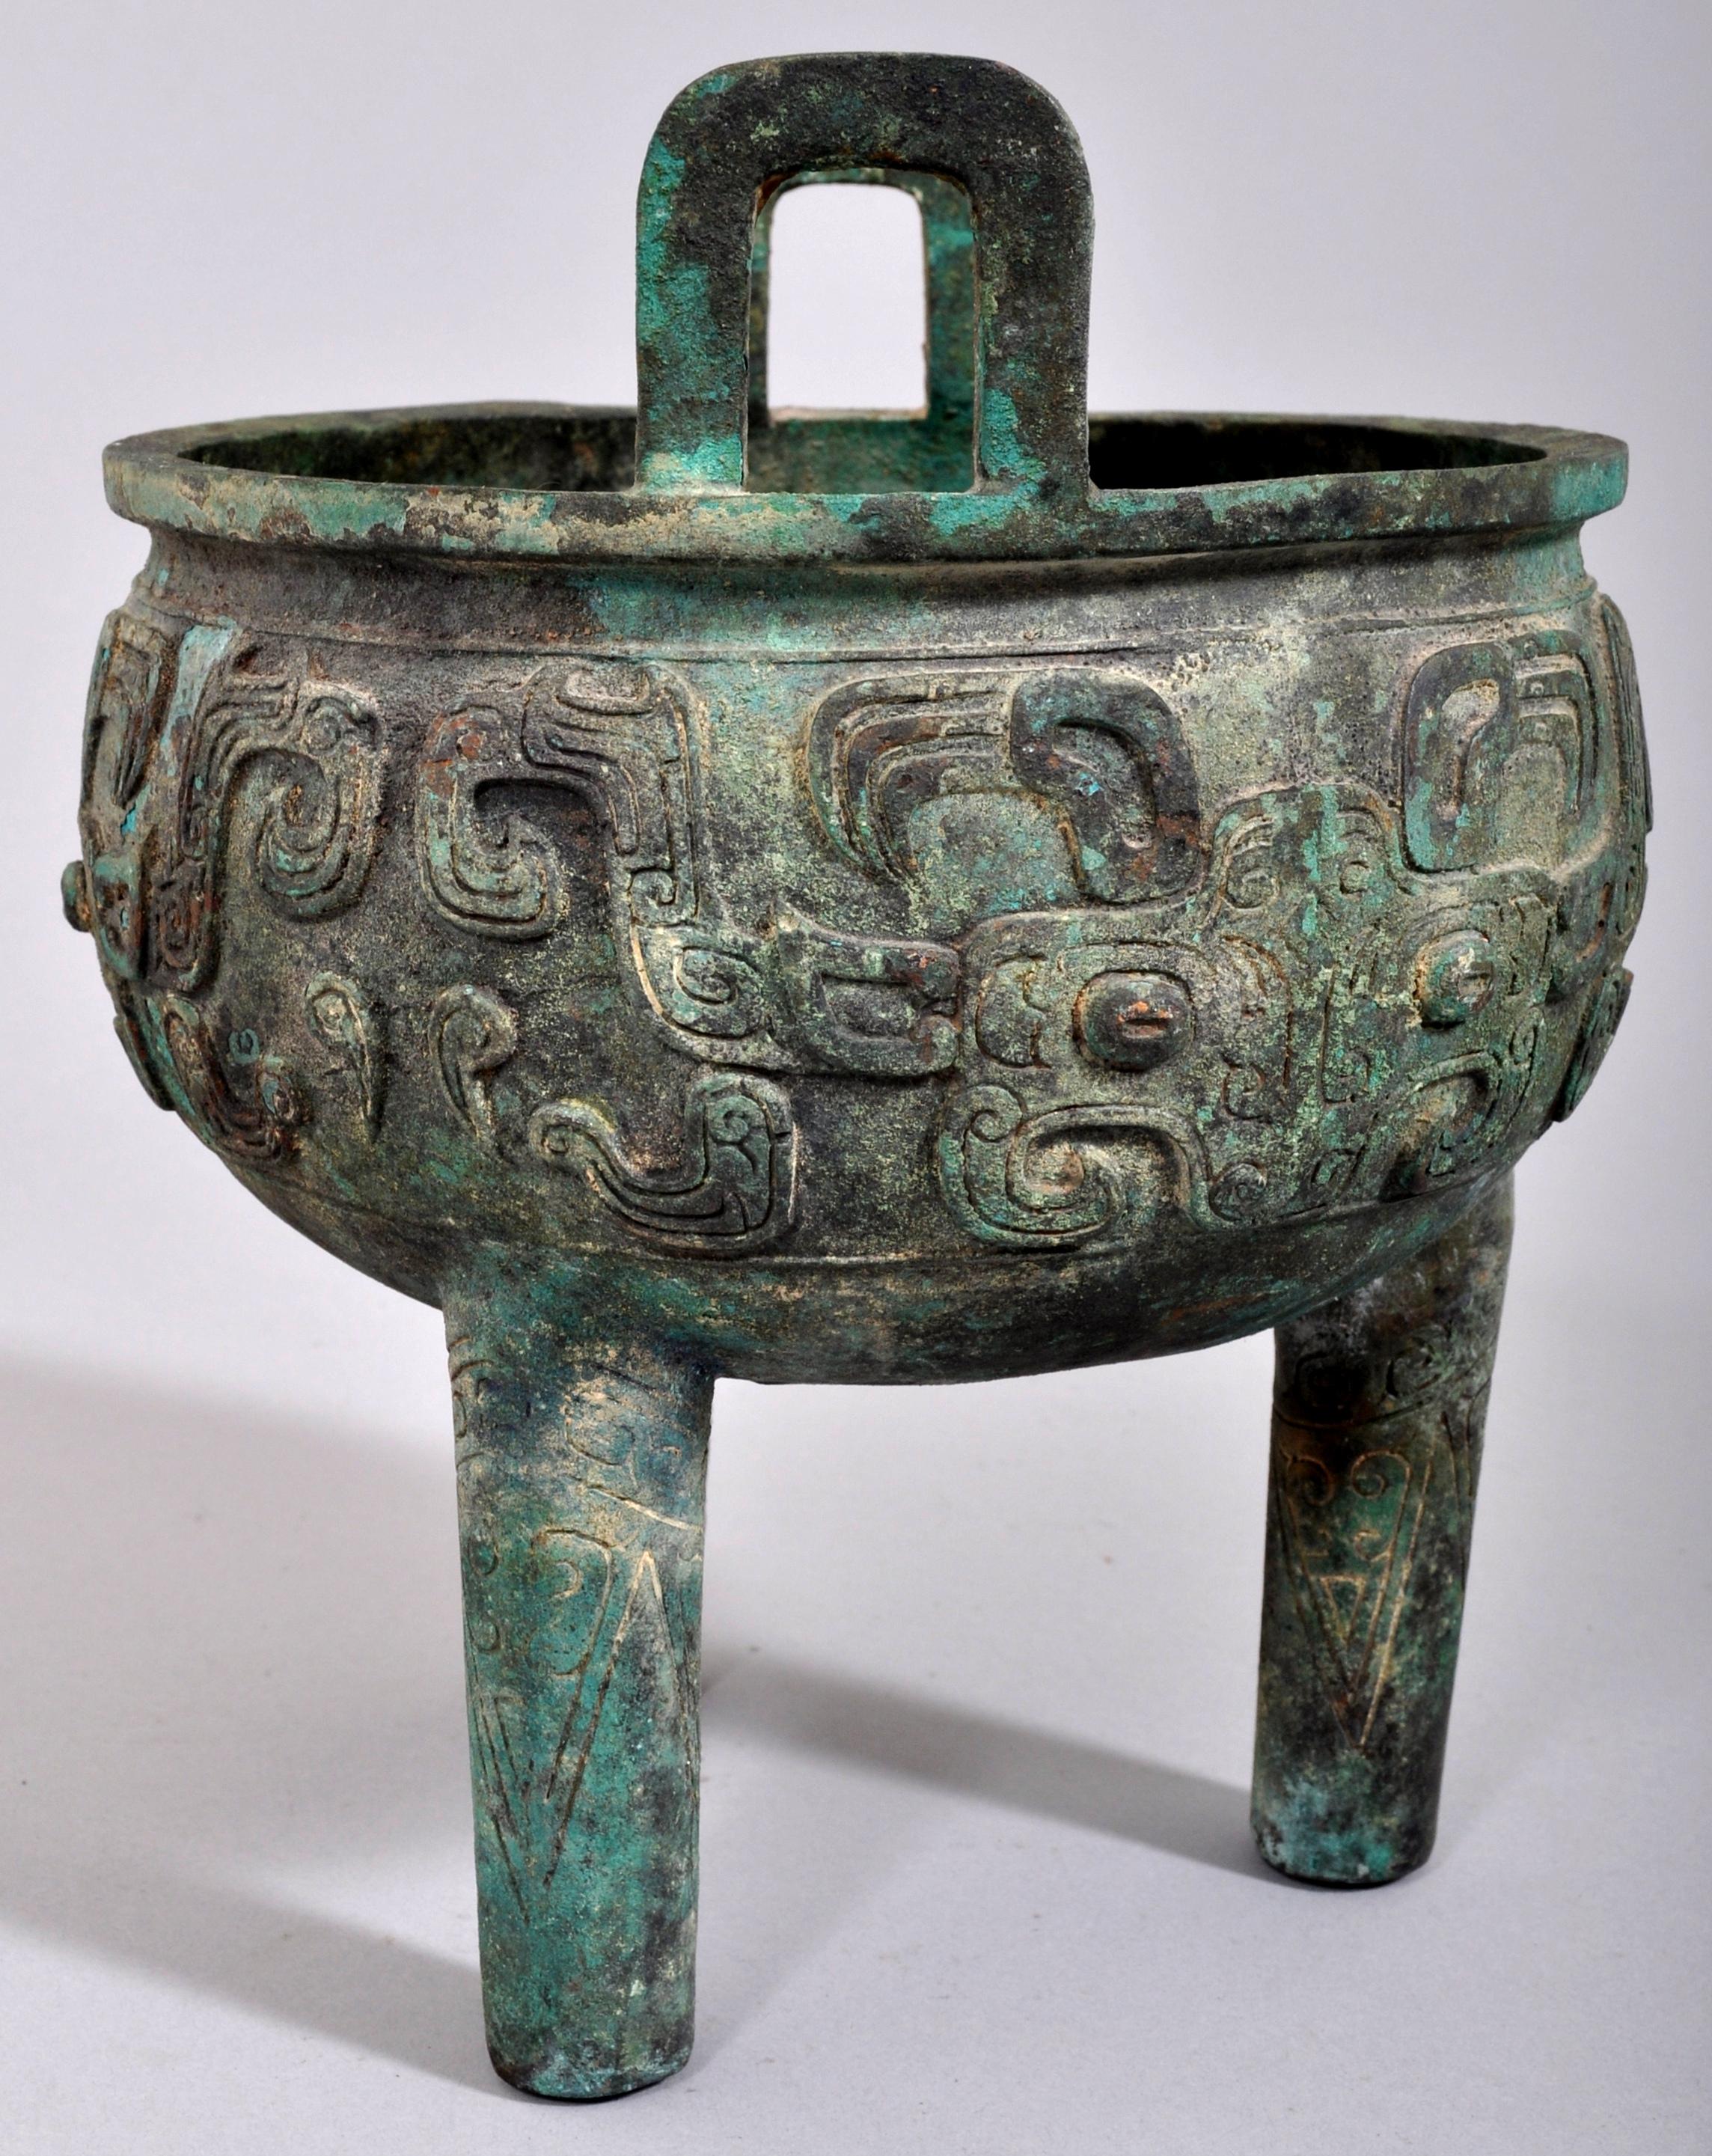 Antique 18th-19th century archaic style bronze tripod ding censer. The censer purporting to be a Ding from the late Shang Dynasty (circa 1600-1046 BCE), but more likely an 18th or 19th century homage to antiquity. The ding of circular form and